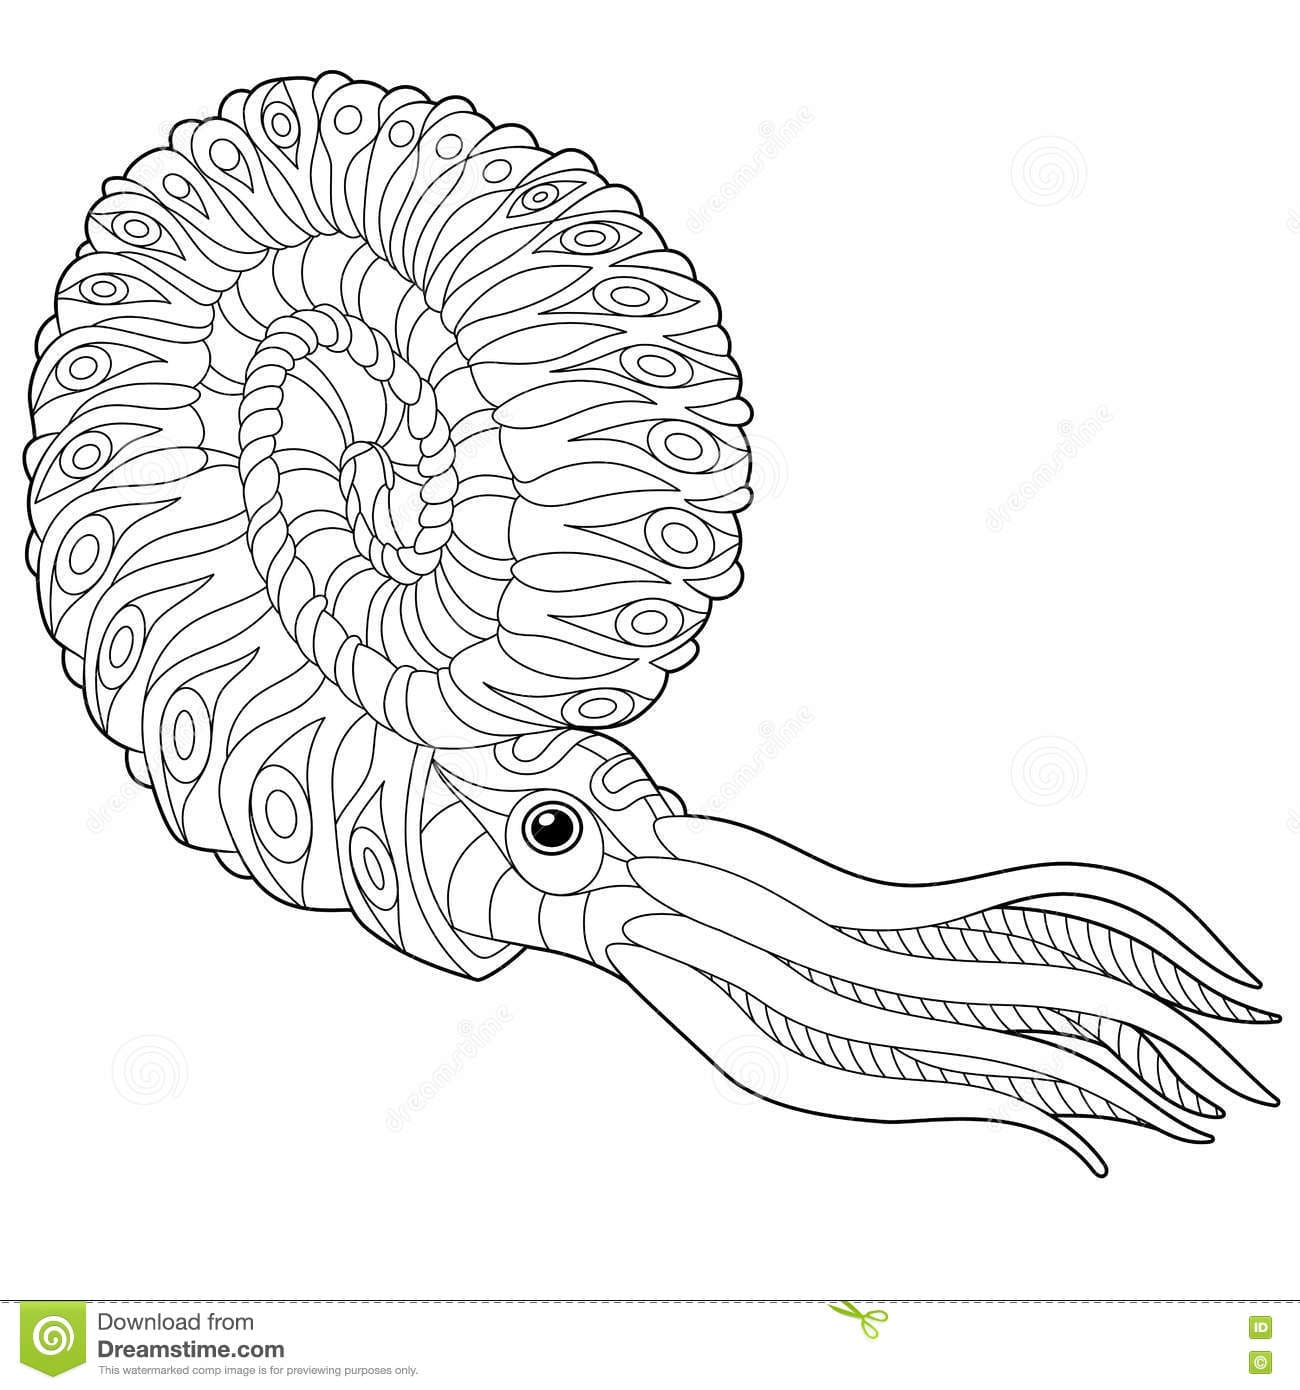 Cute Squid To Print Coloring Page